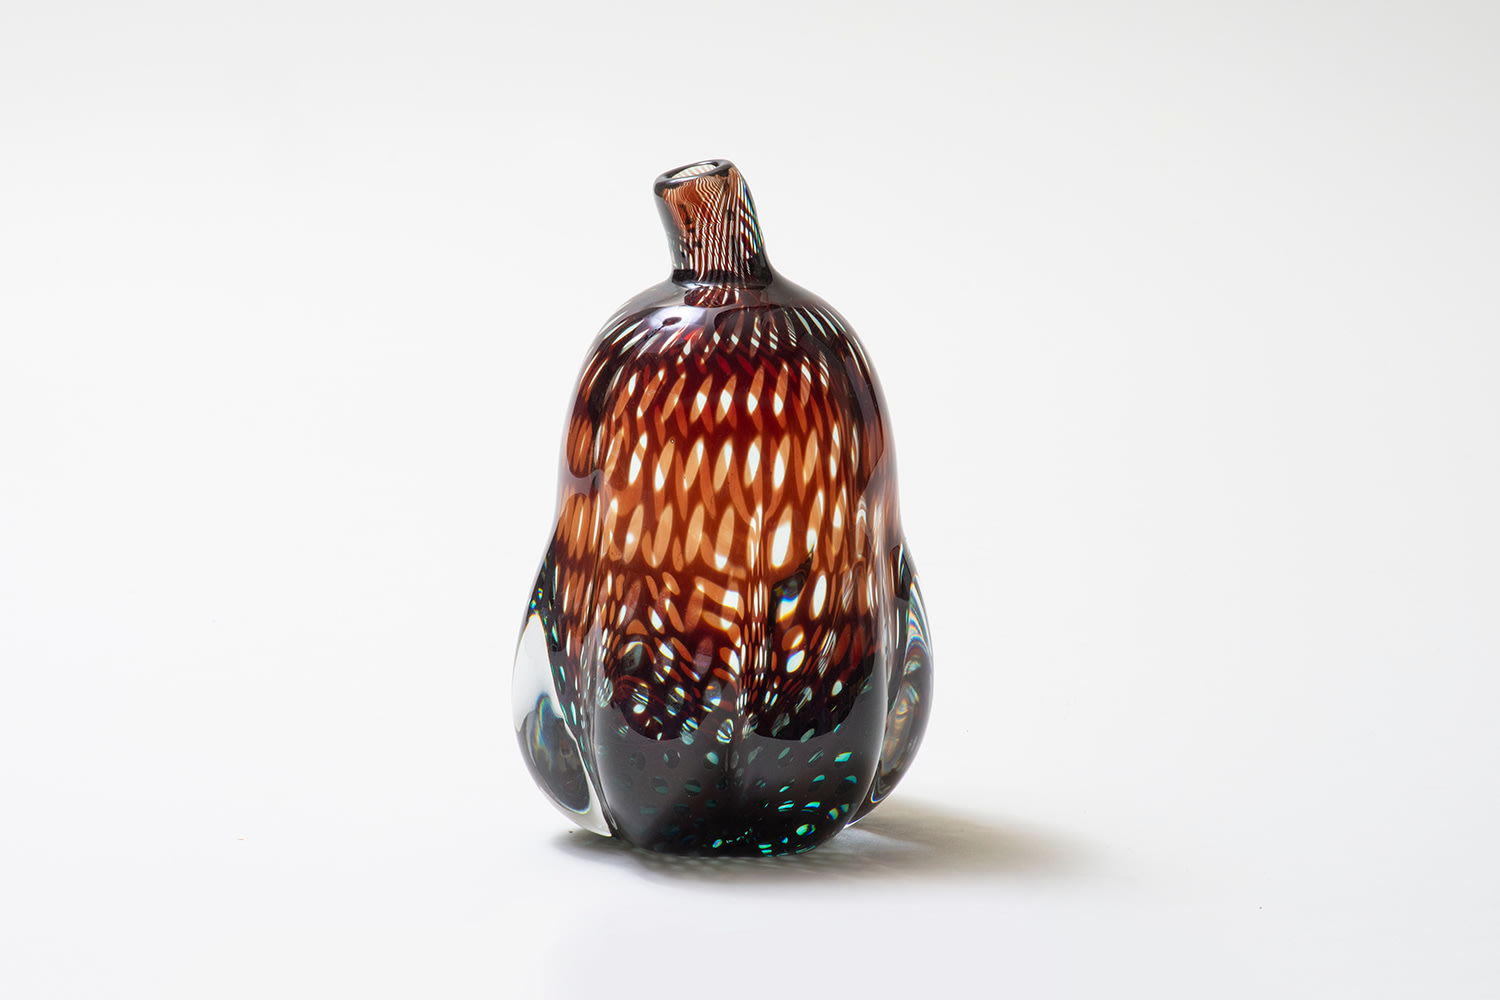 a cased glass vase in the &quot;graal&quot; technique by edward hald for orrefors, the gourd-shaped vase a piece of art glass sculpture, the thick clear glass encasing an optical pattern of burgundy lattice-like design